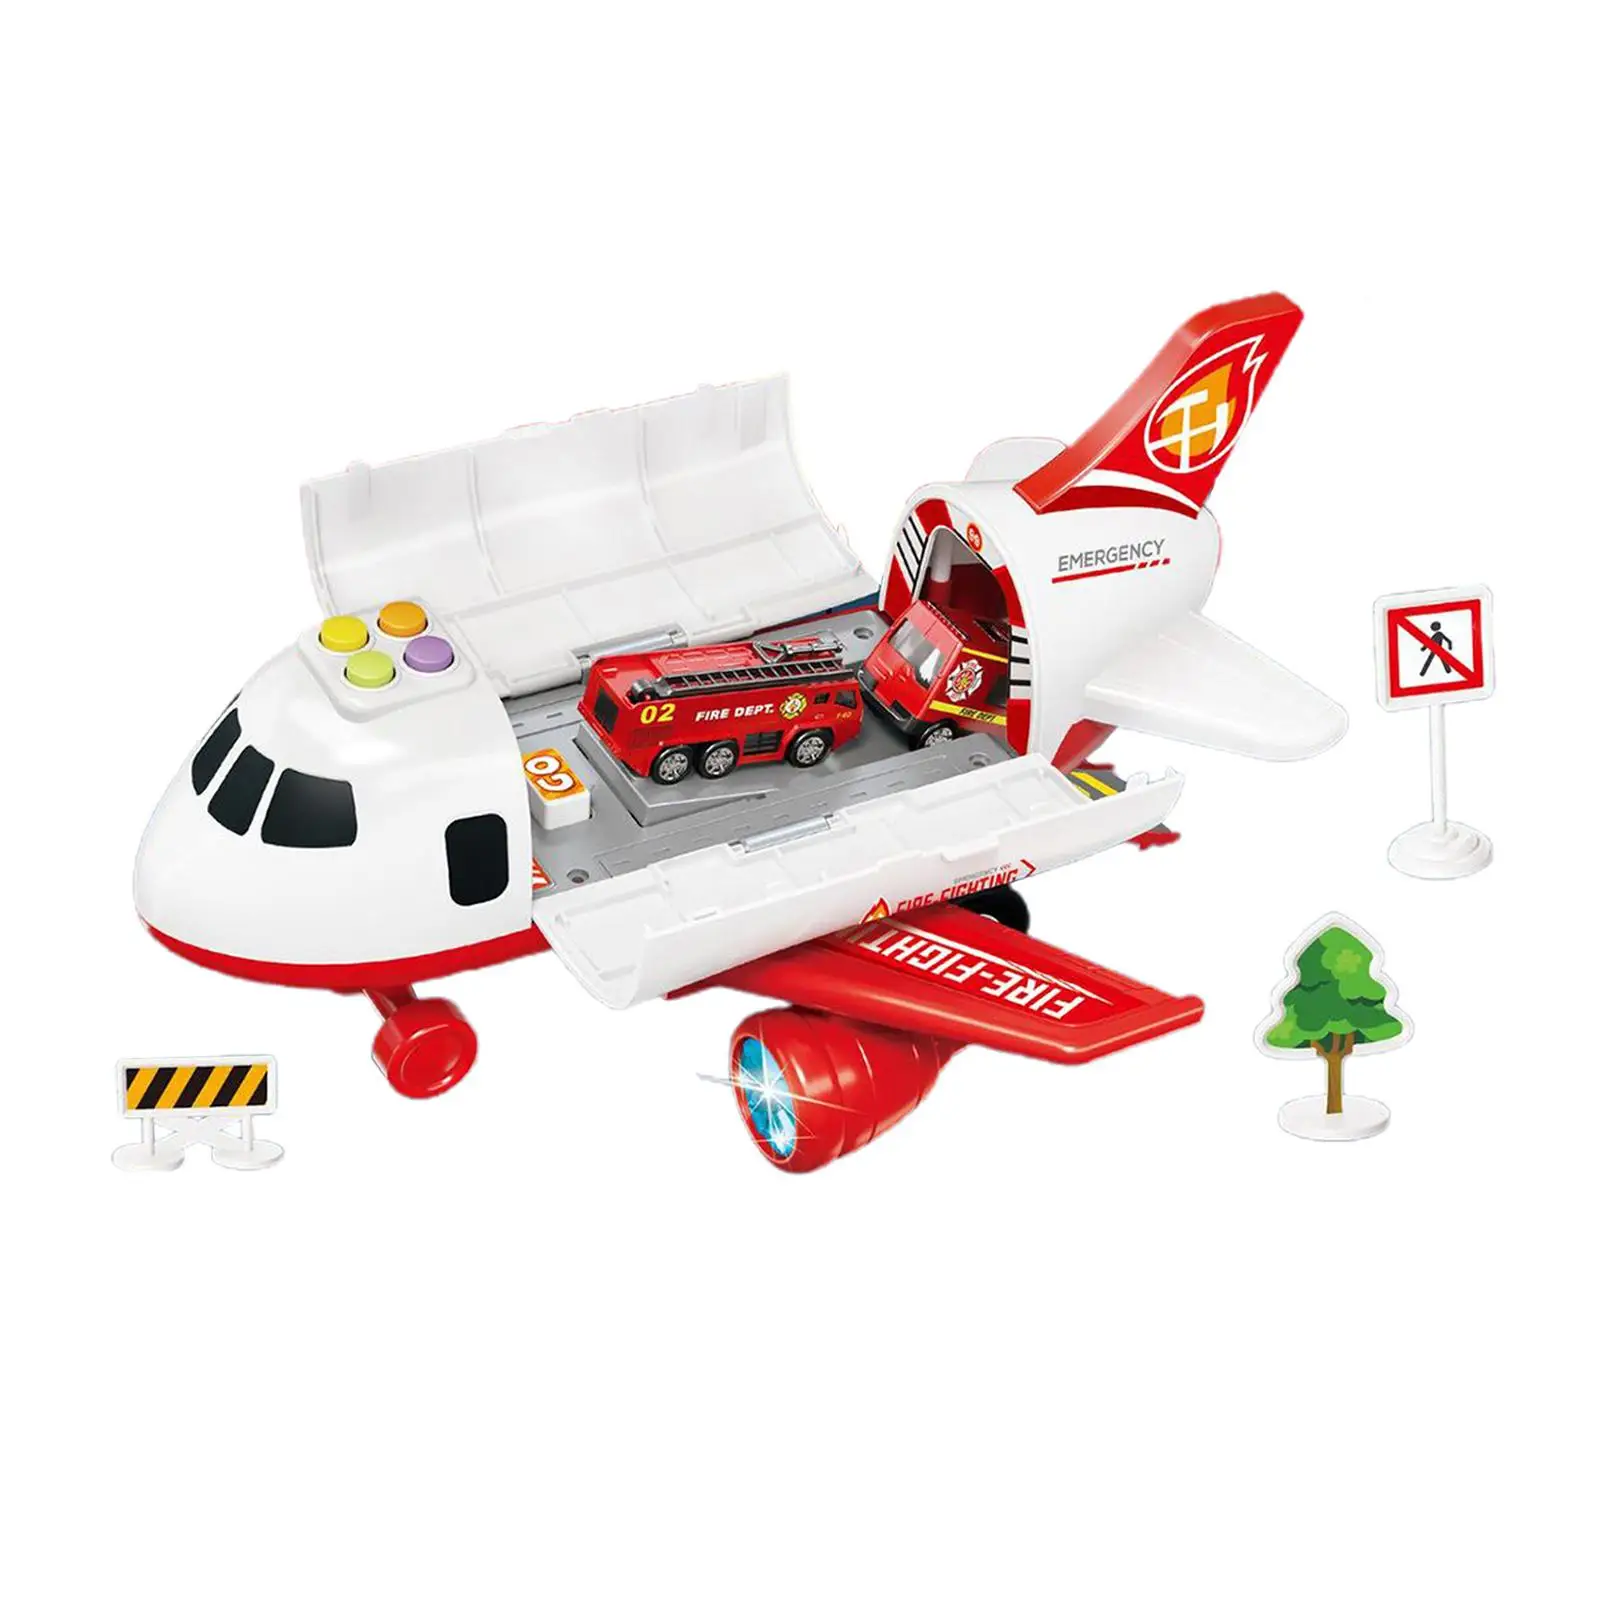 Simulation Inertial Kids Airplane Toys Set Early Education Toys 28x31x15cm